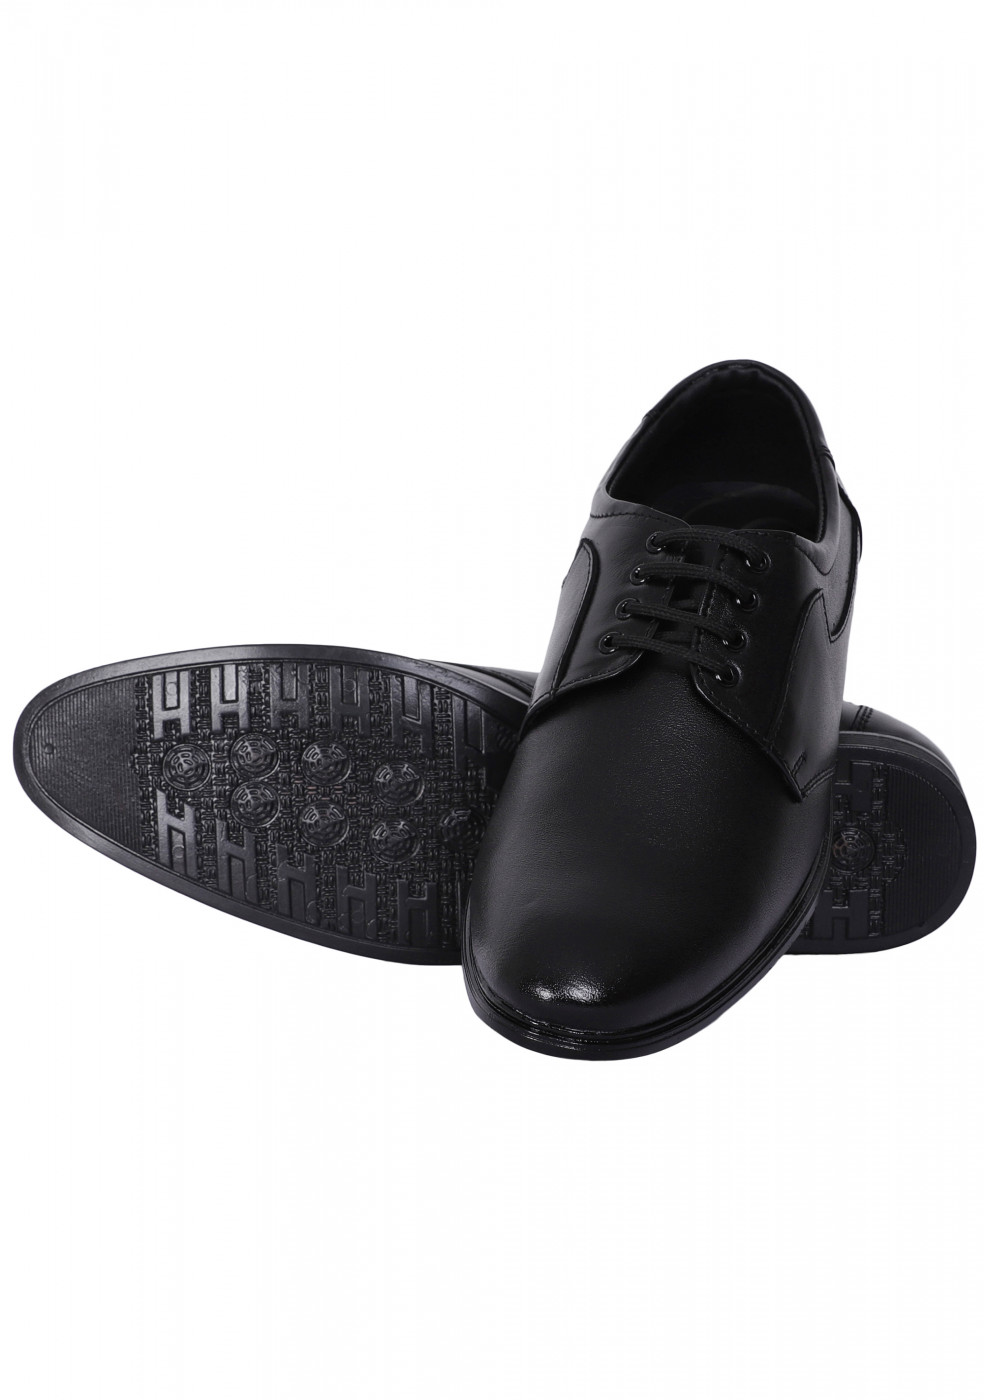 XSTOM Lather Formal Laceup Black Shoes For Men